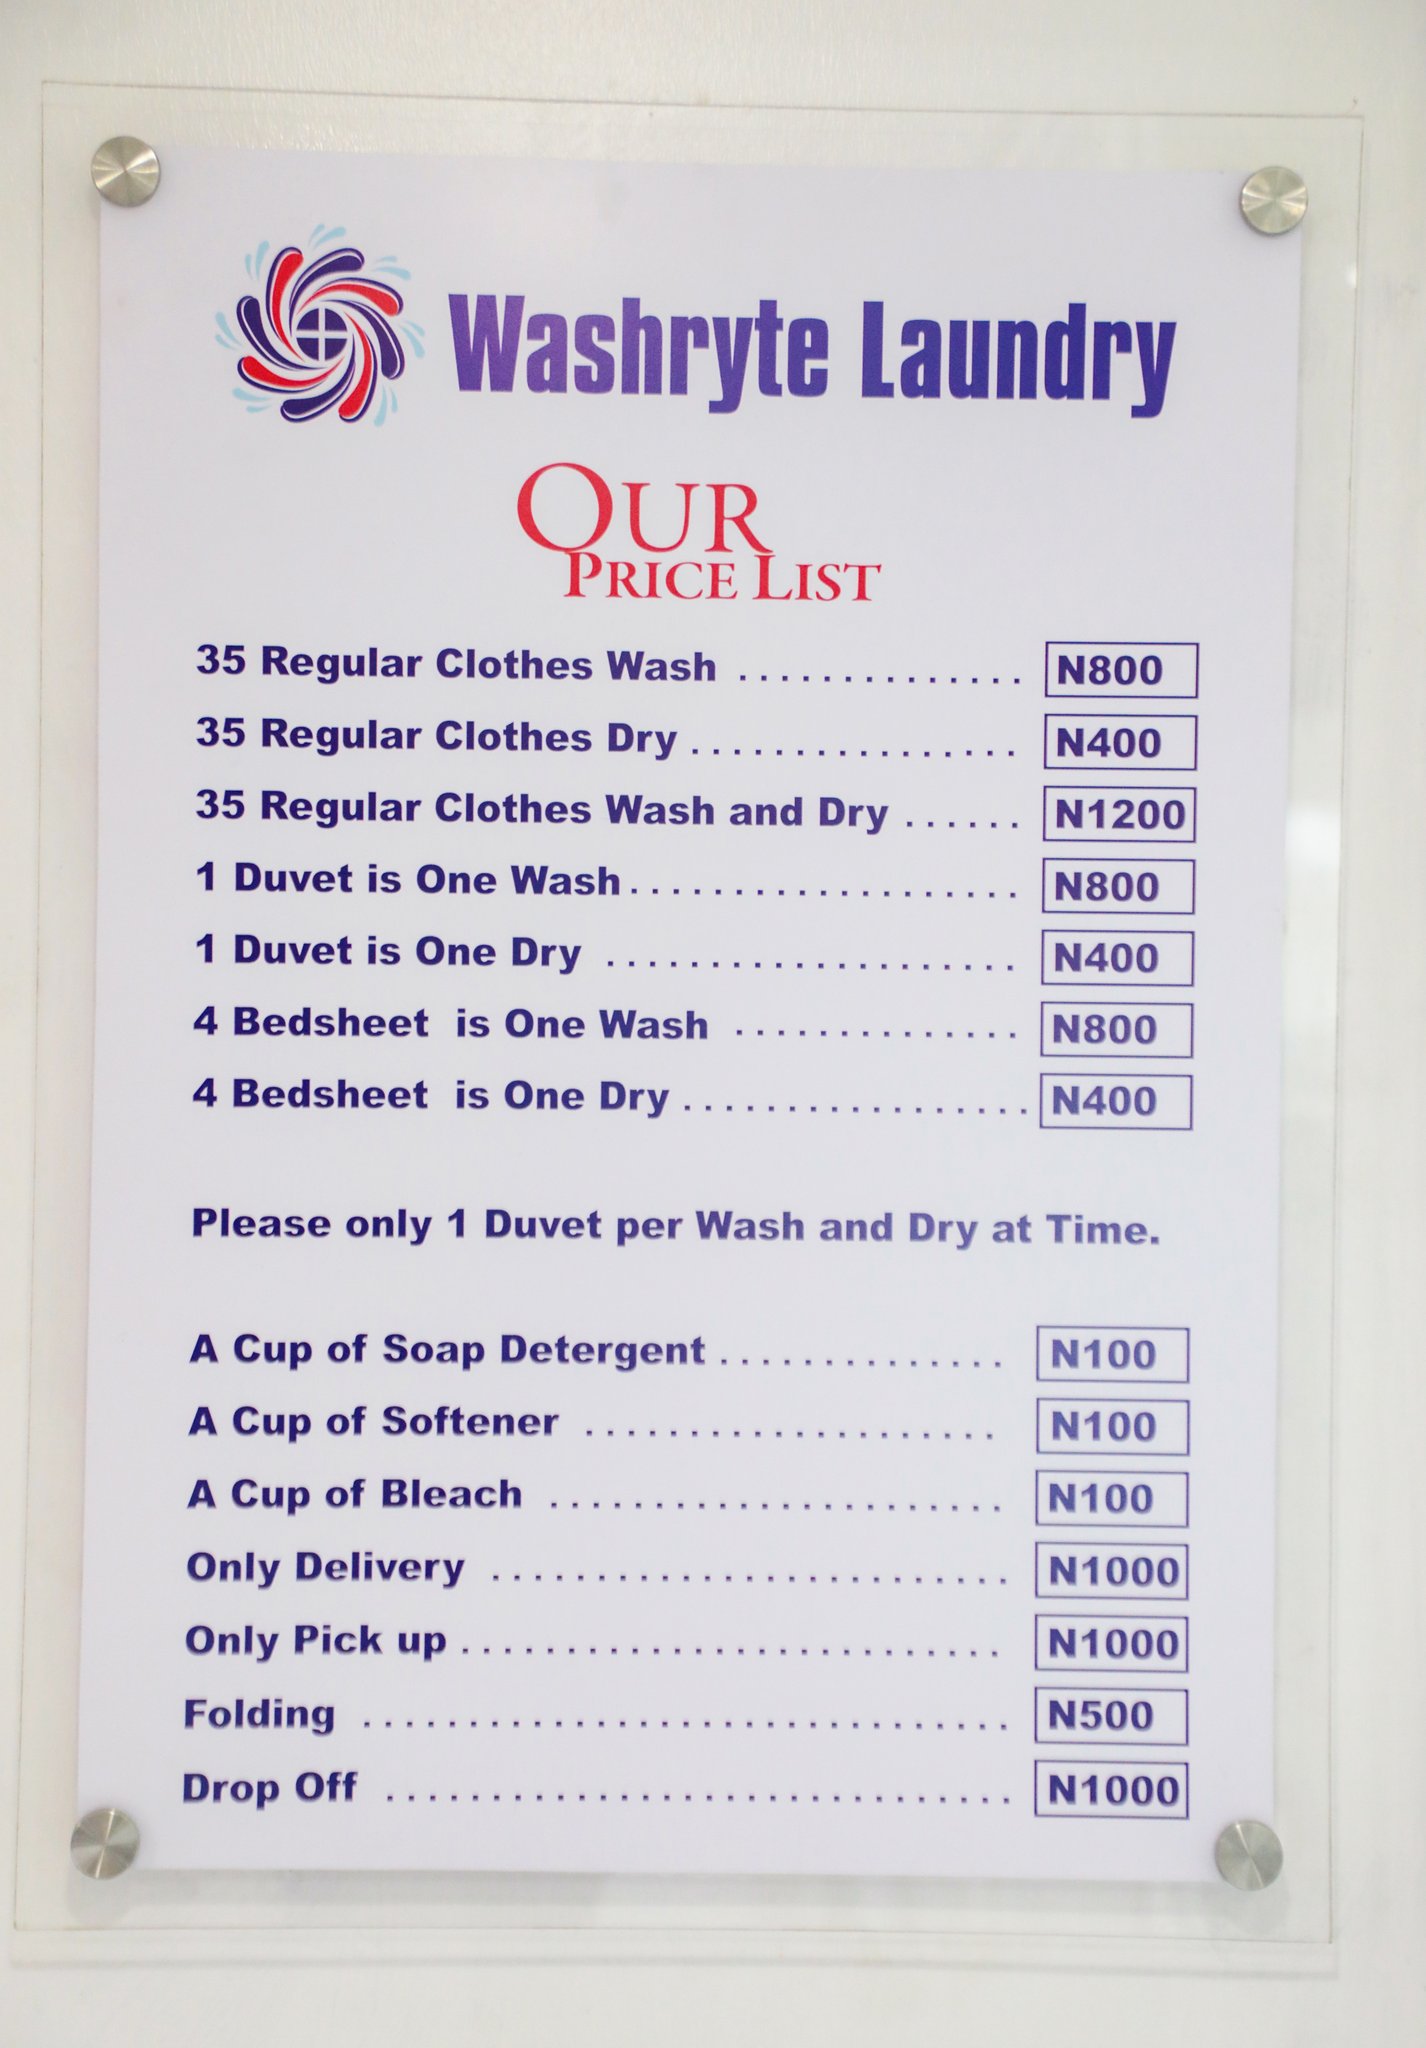 WashRyte Laundromat on Instagram: Our LAUNDROMAT is located @ Lennox Mall  Block 10, Plot 2,3 Admiralty Way, Lekki Phase 1, Lekki Lagos. You only need  to make one phone call and schedule